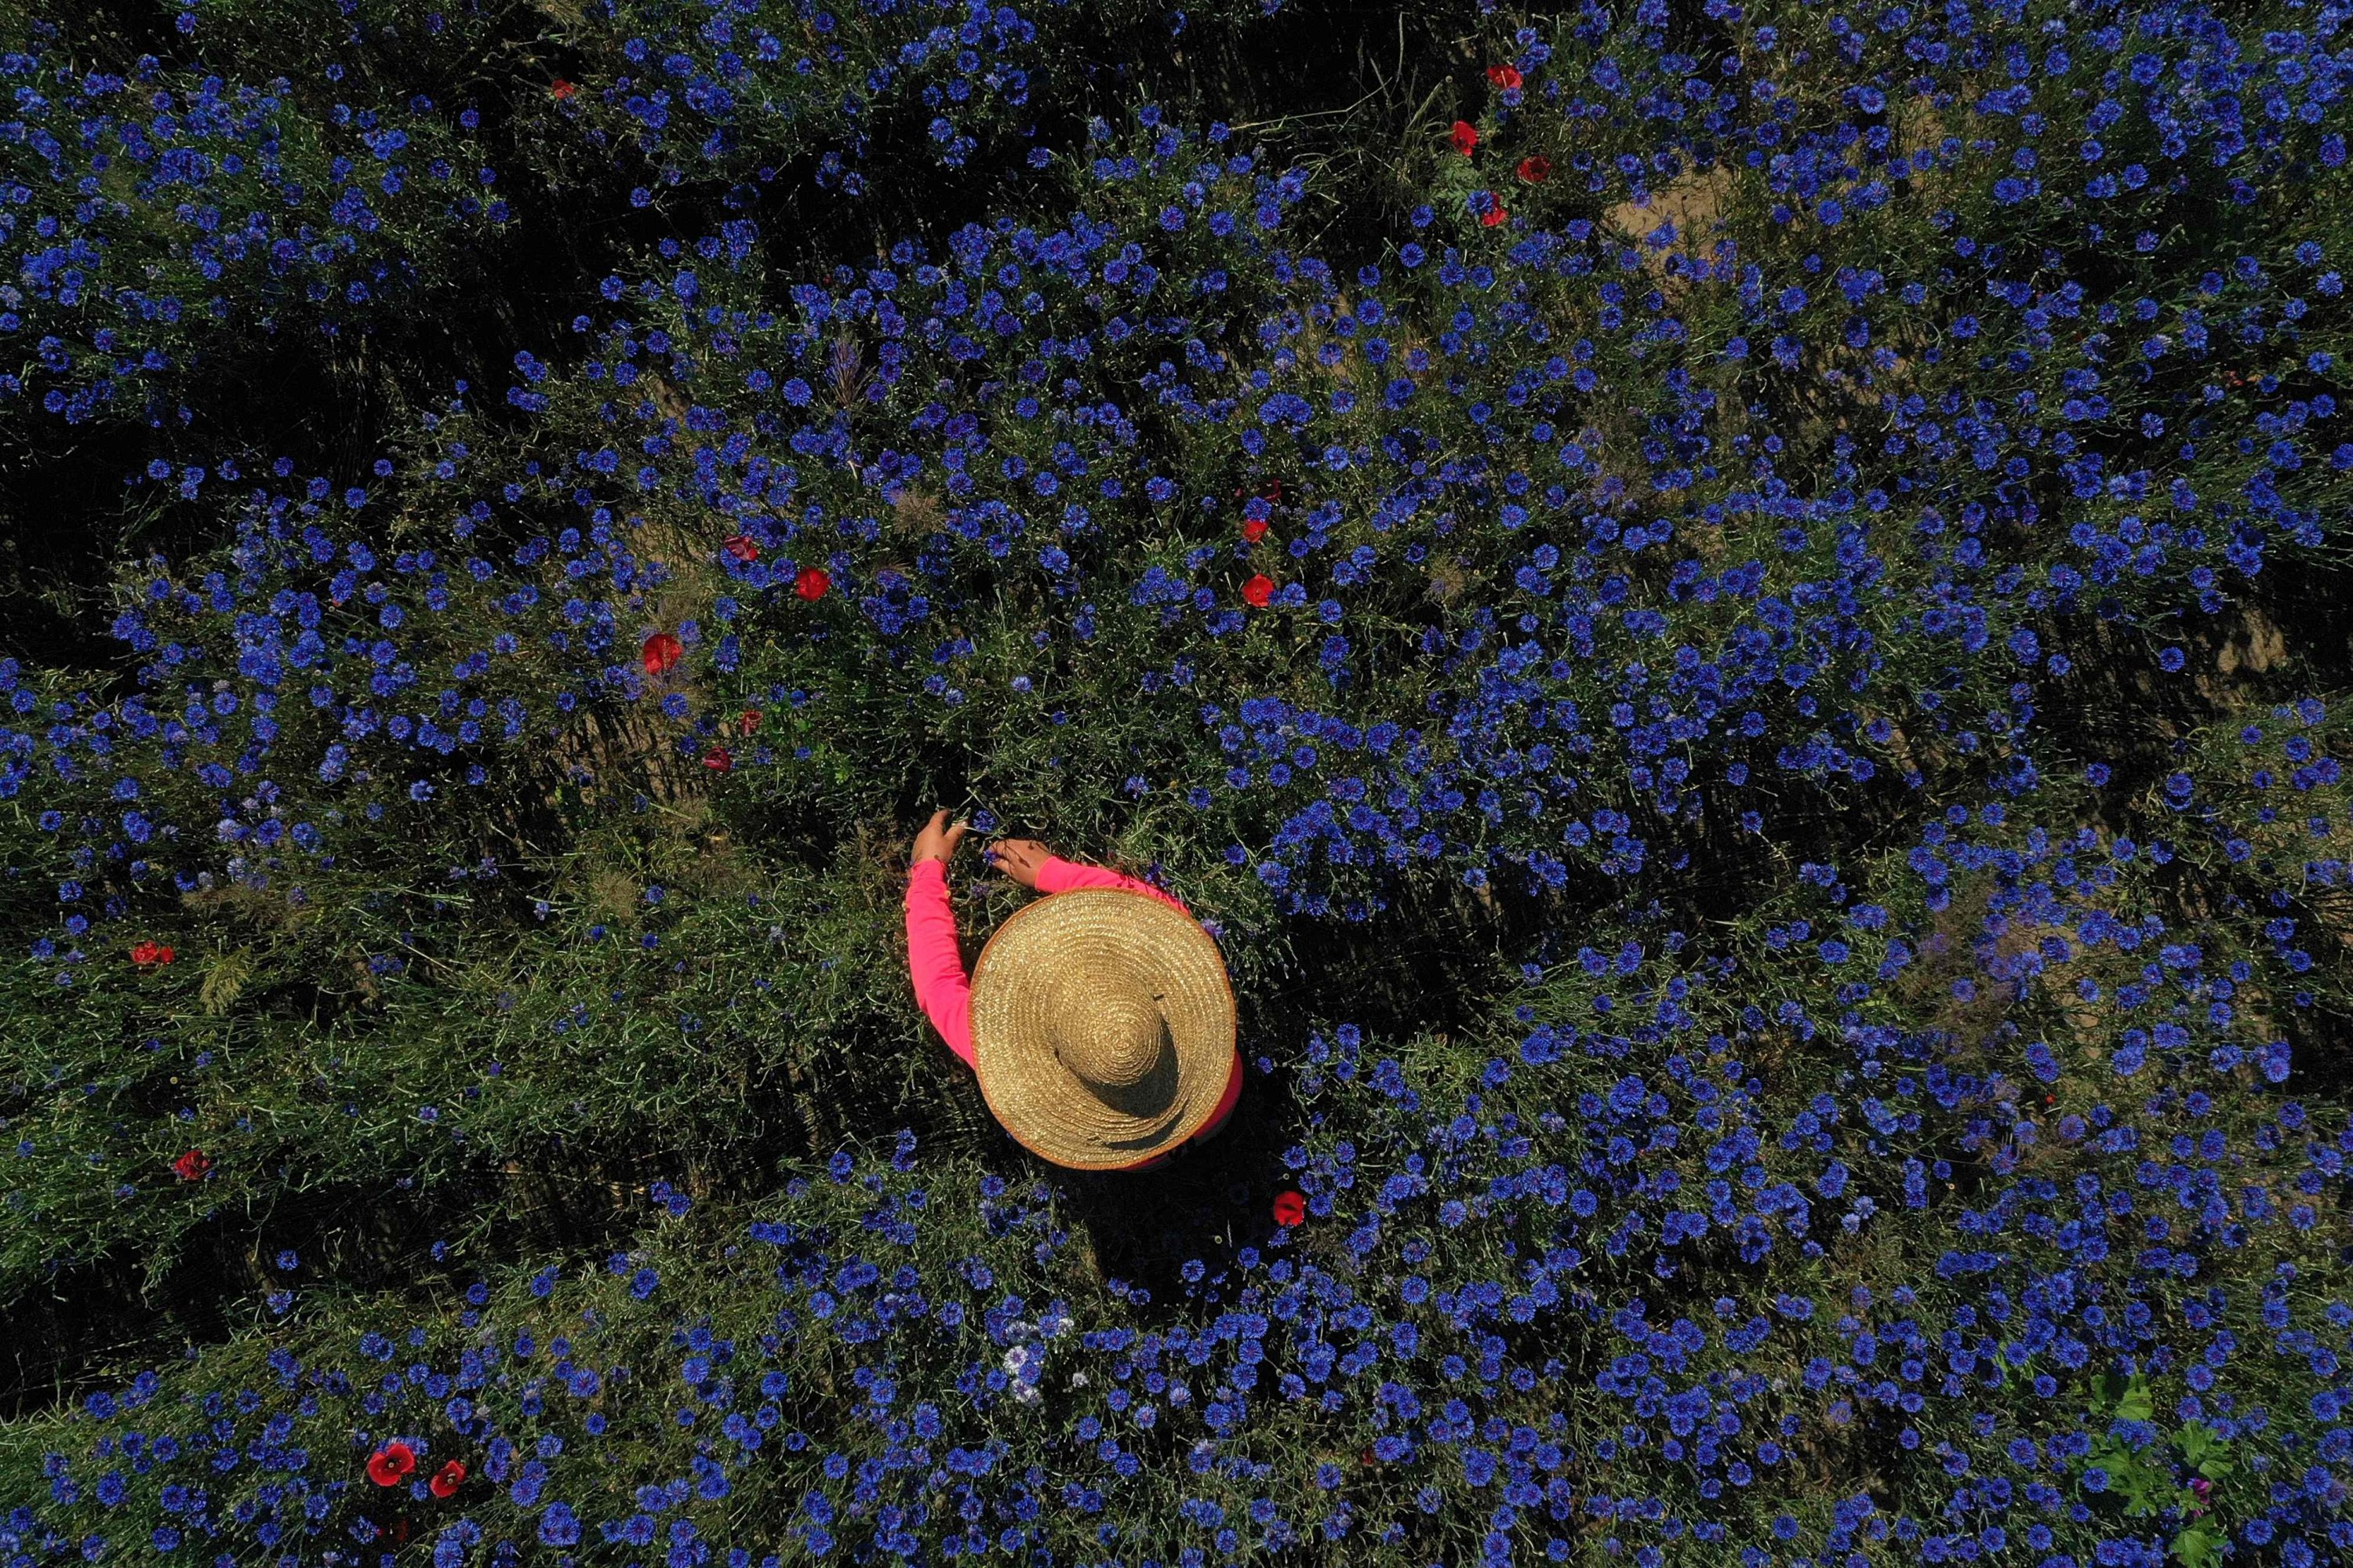 An aerial view shows a woman wearing a hat picking up medicinal herb Centaurea cyanus, commonly known as cornflower, in the village of Sheqeras near the city of Korca, Albania, June 16, 2021. (AFP Photo)